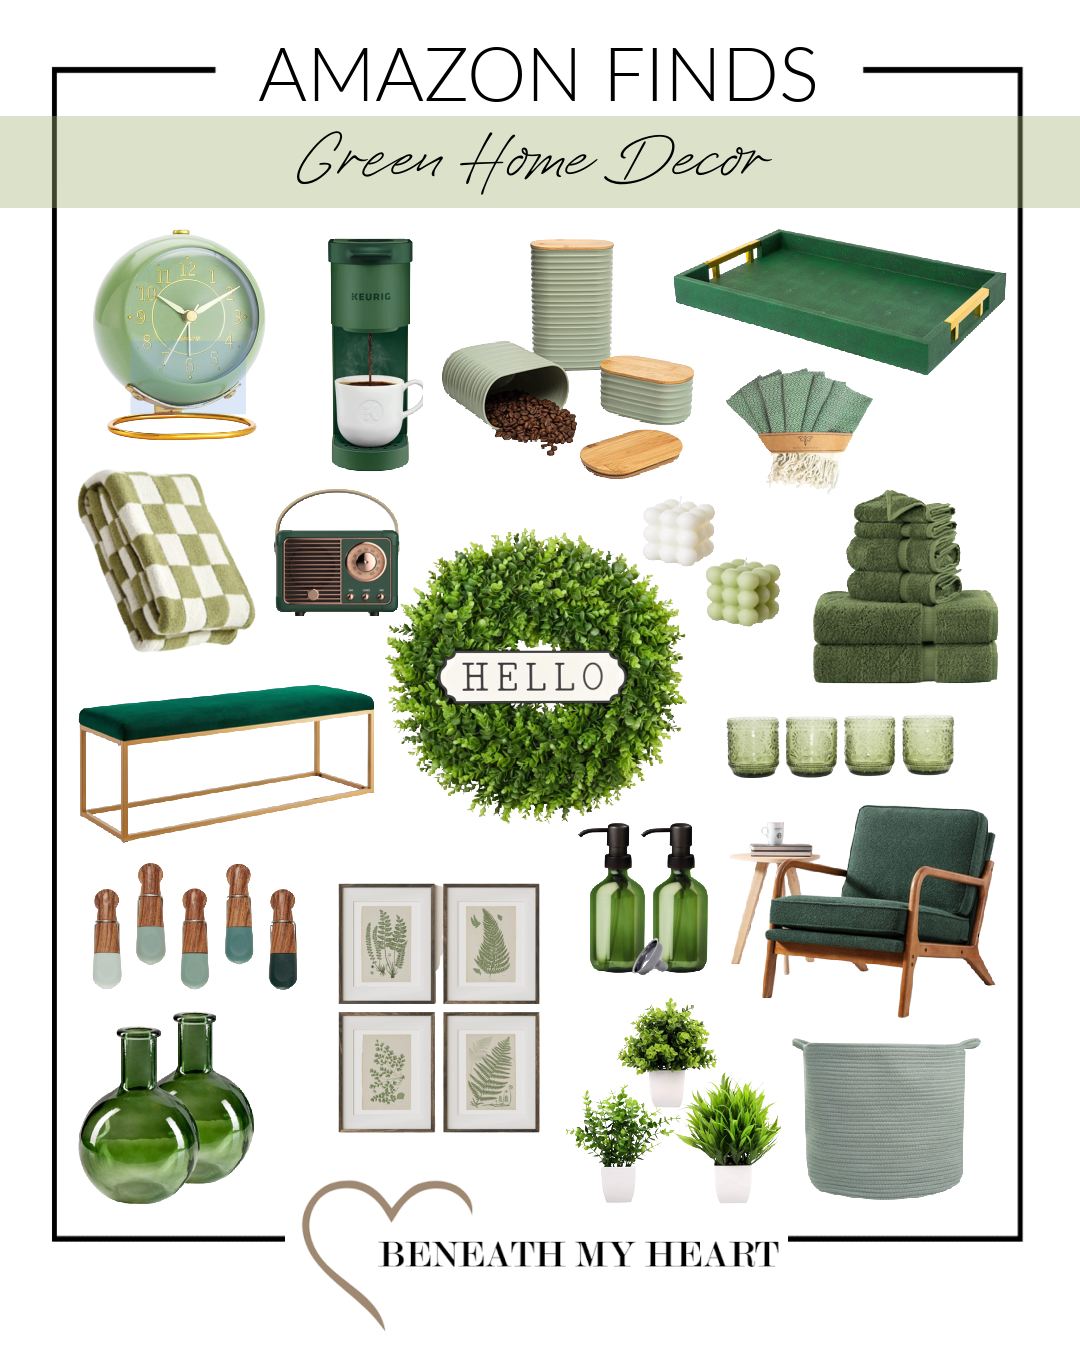 Green Home Decor Finds from Amazon